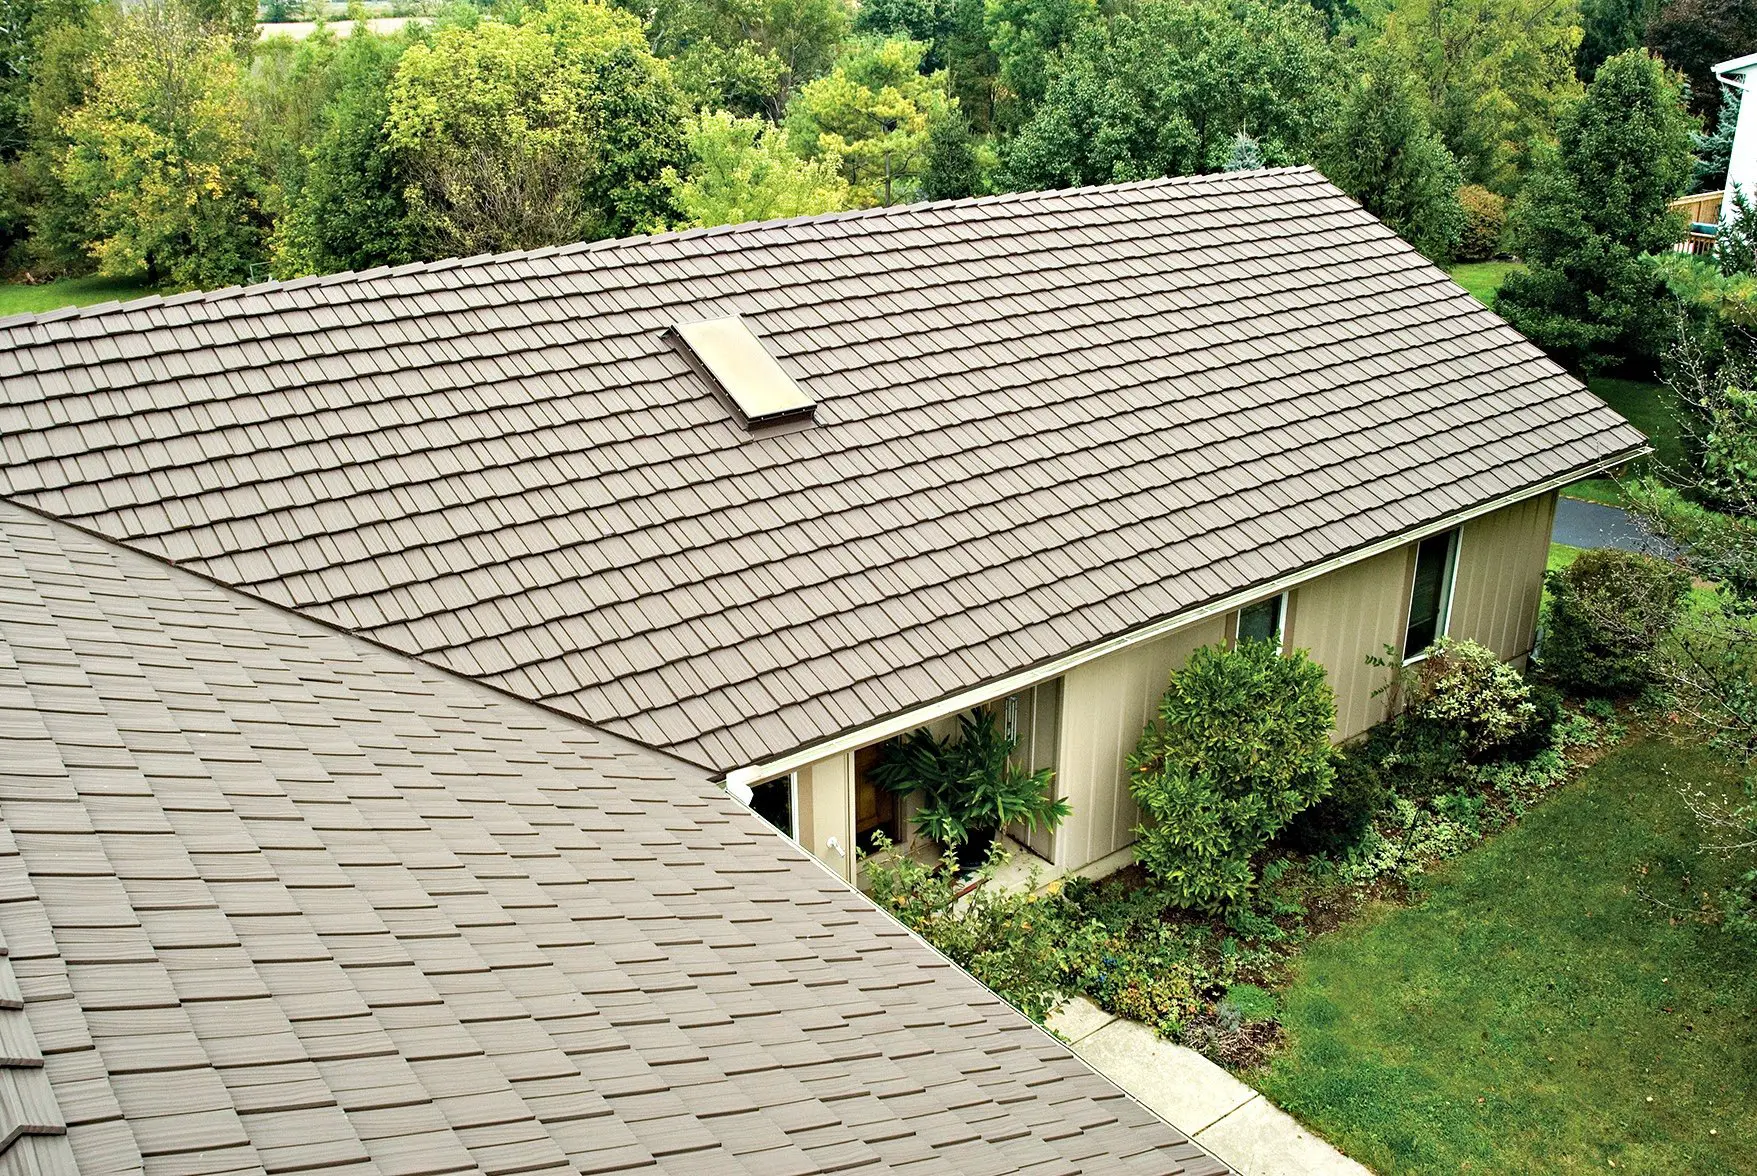 Energy Savings from a Cool Metal Roof